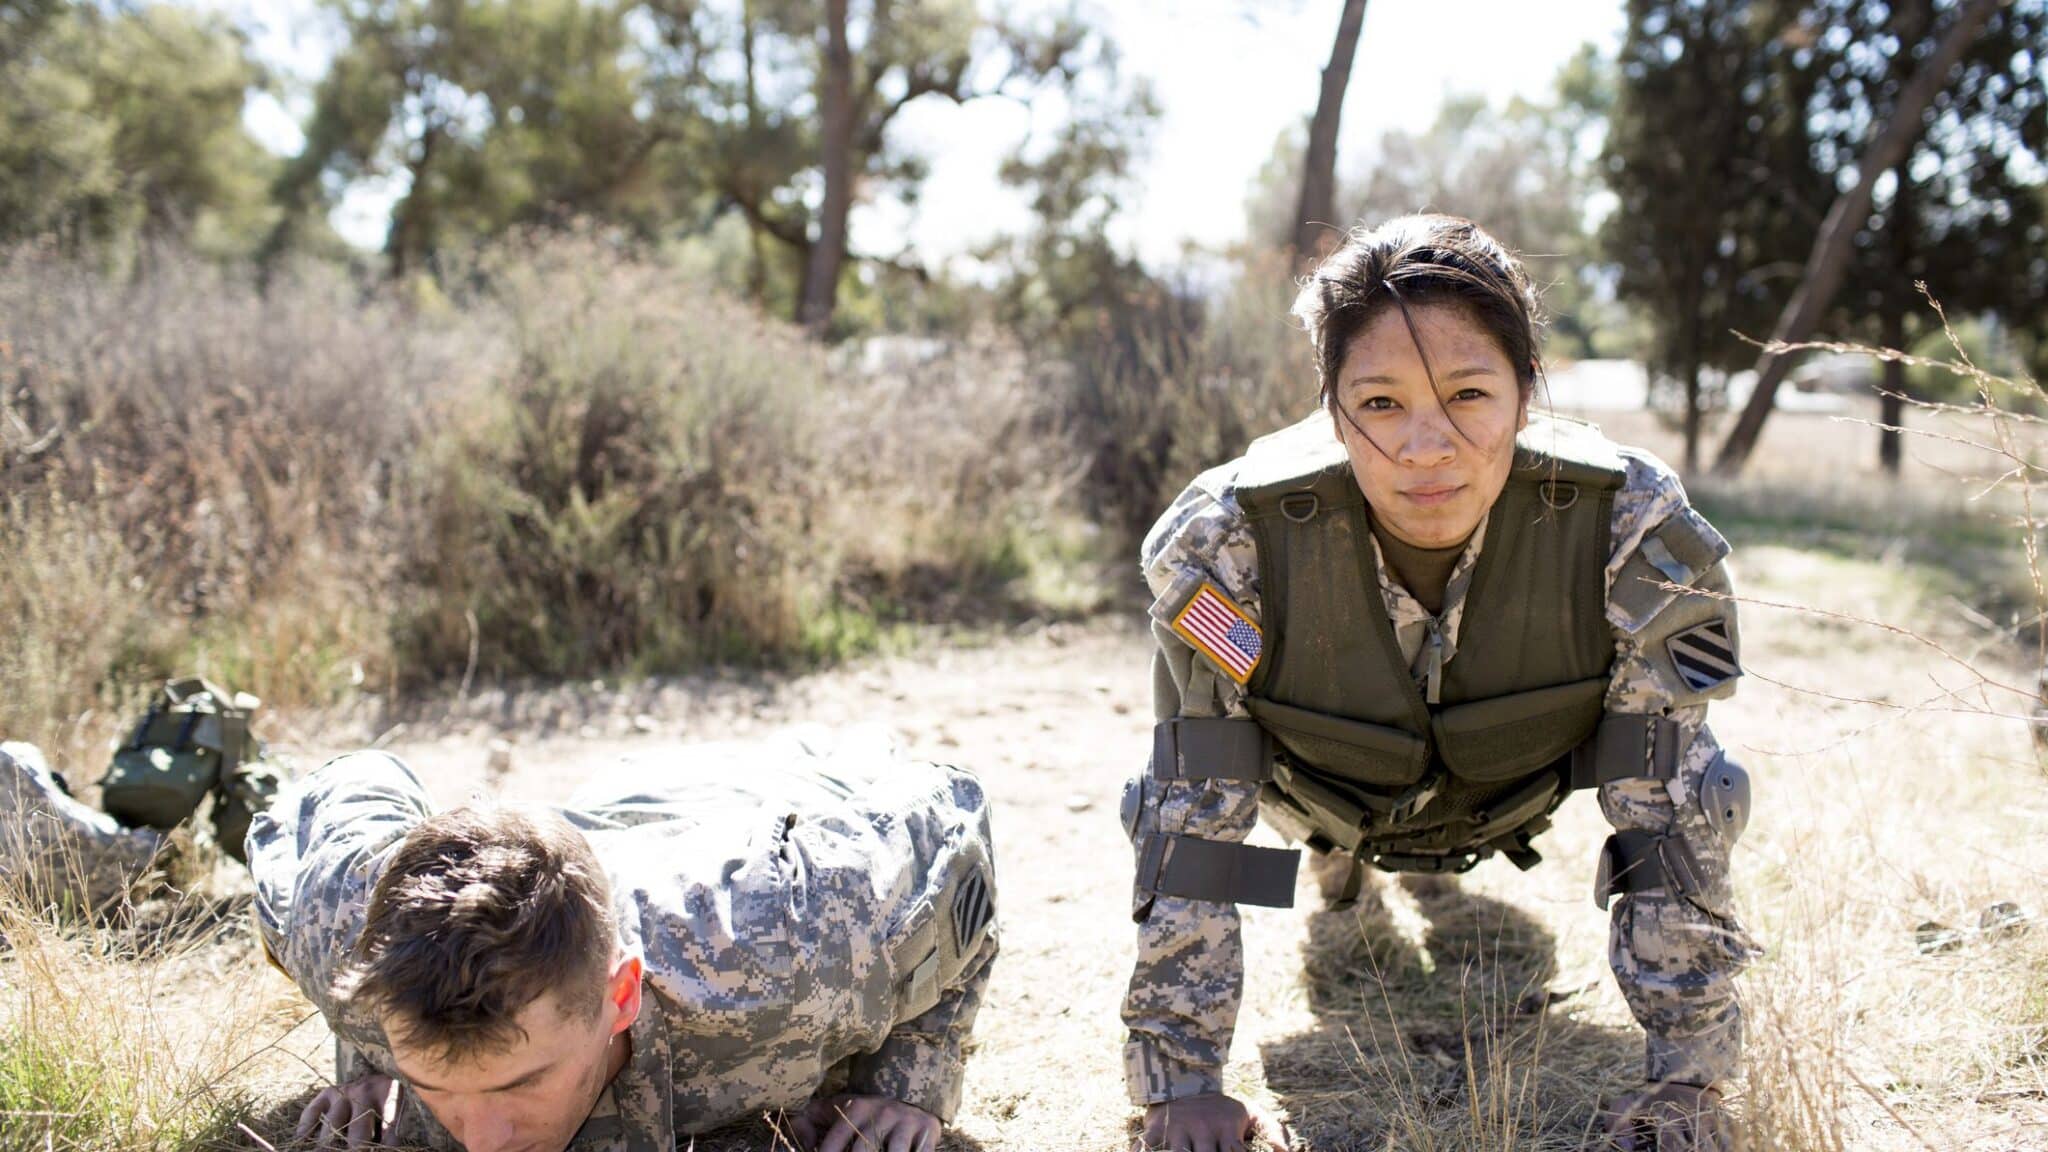 Two US soldiers doing push-ups during outdoor training. Photo: Catherine Ledner/Getty Images.